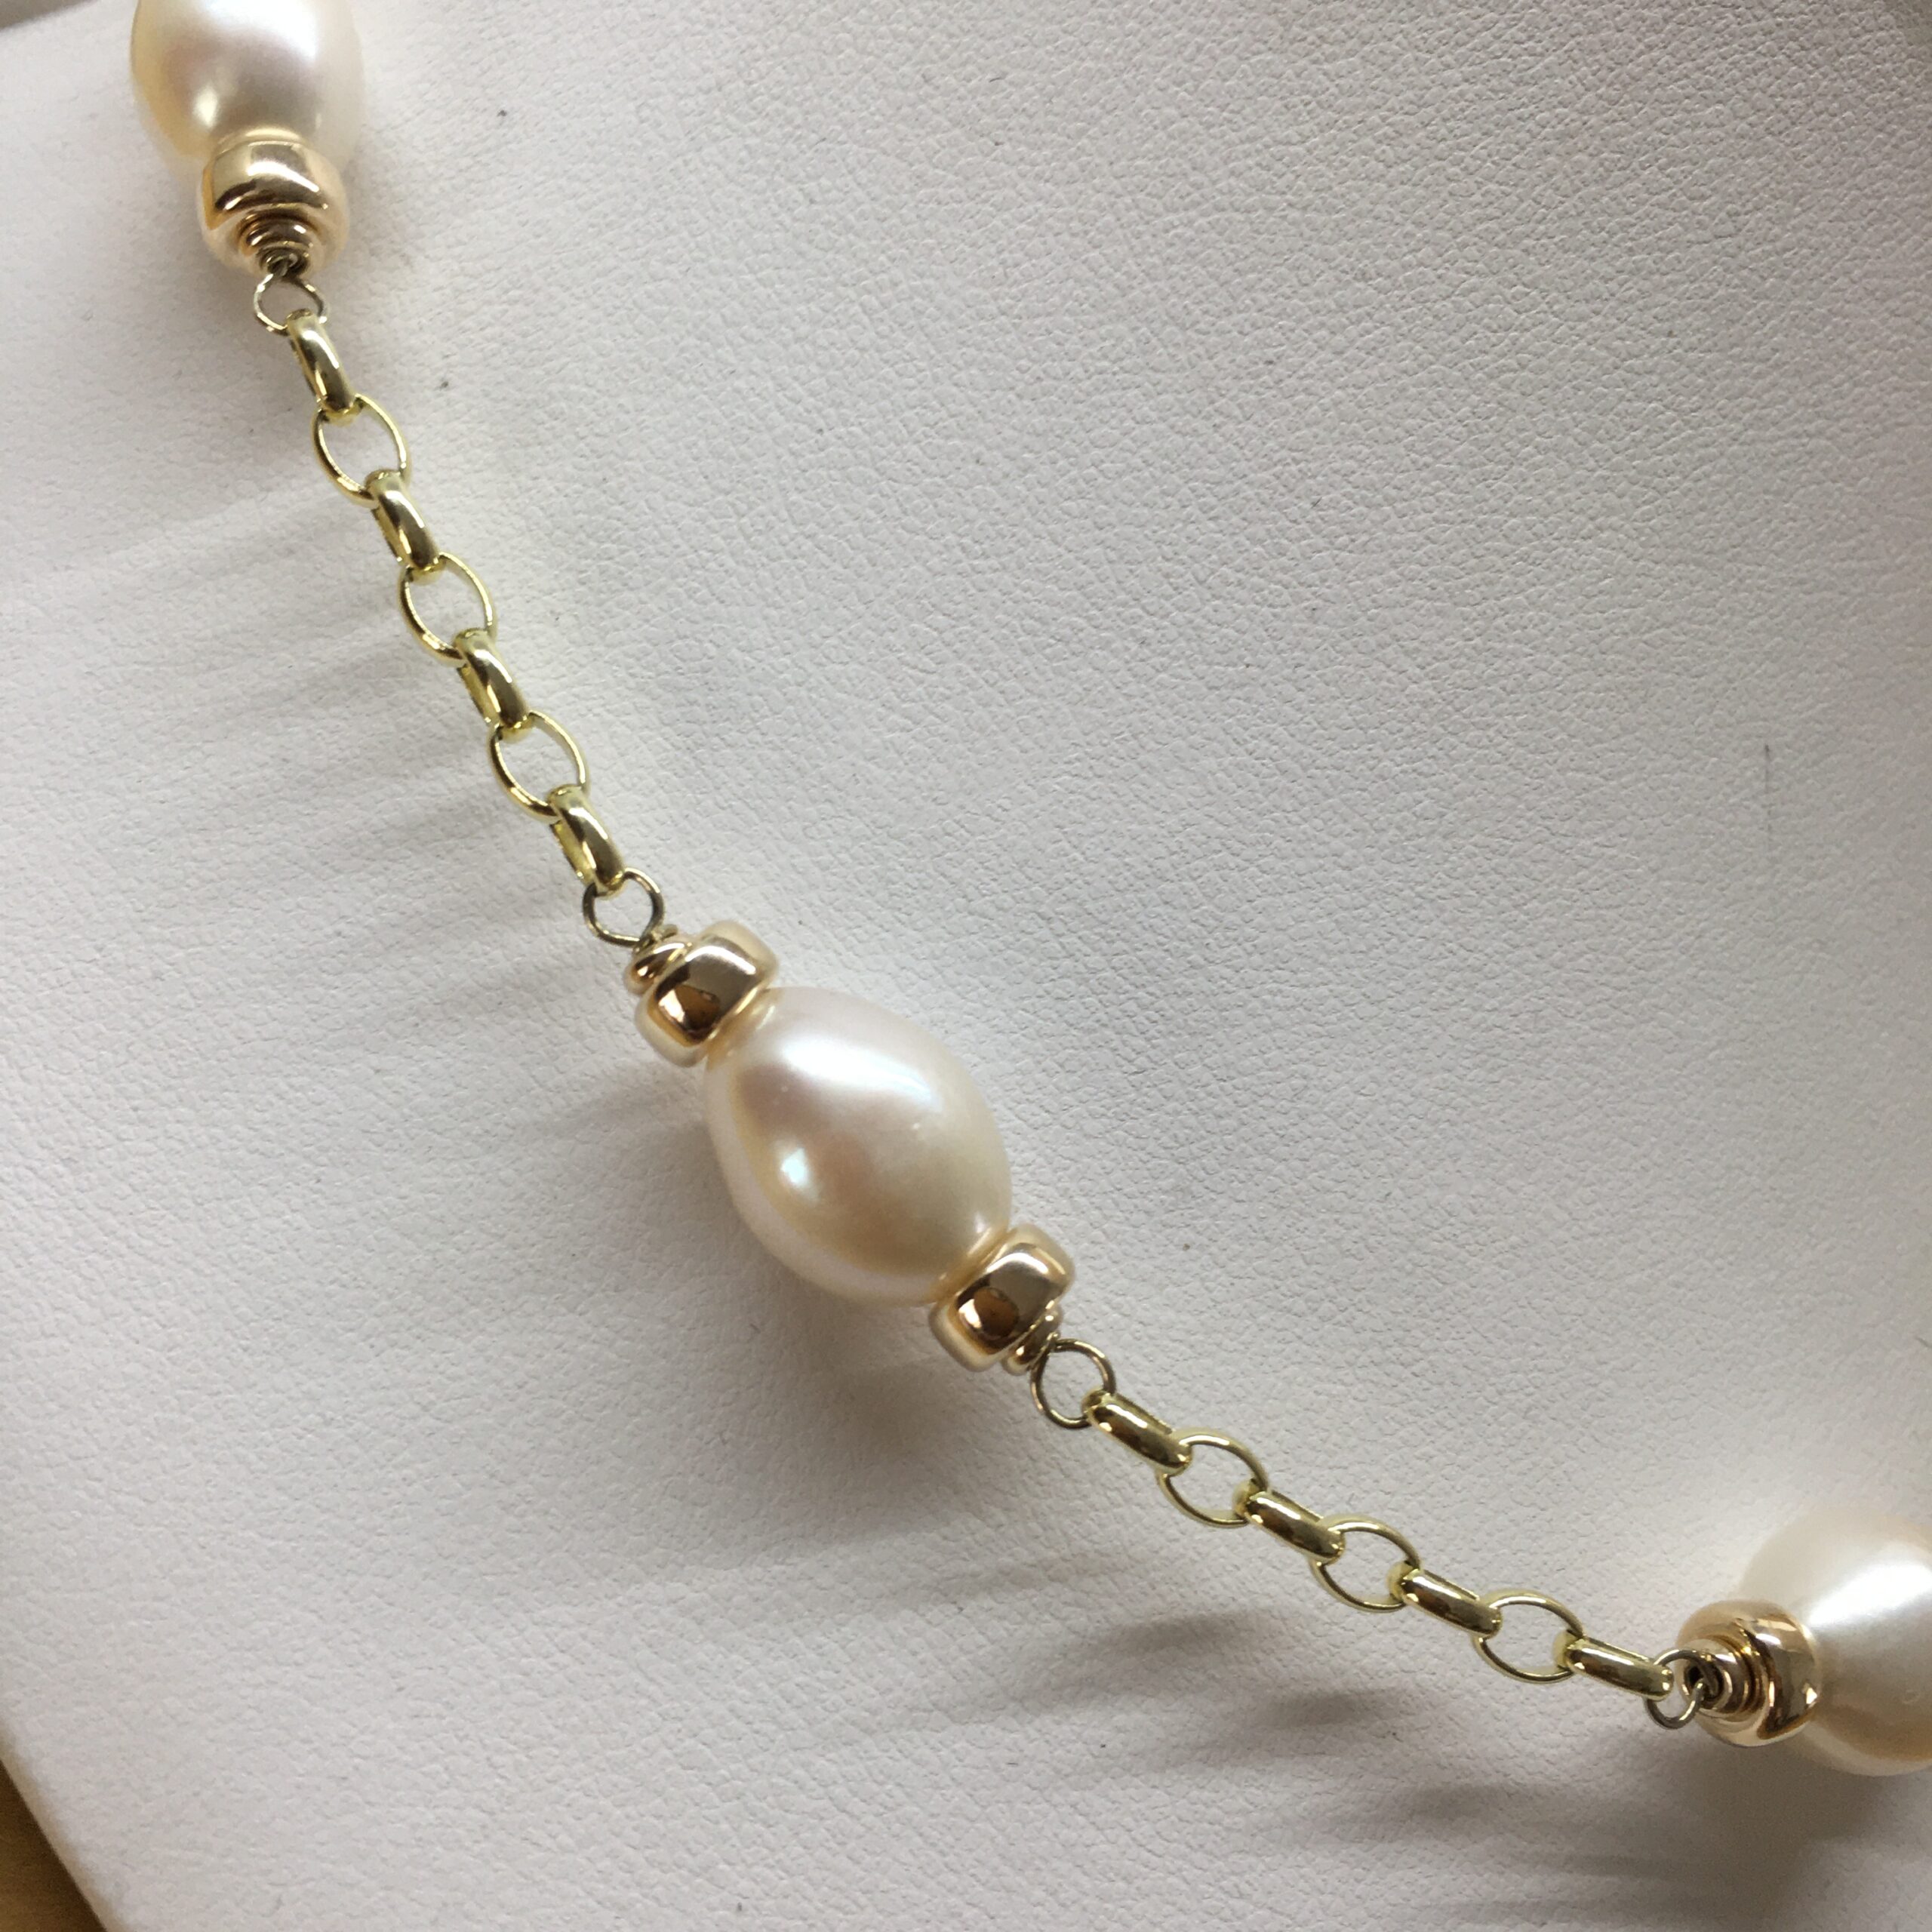 Heavier Mary Berry Style Necklace - Harriet Whinney Pearls